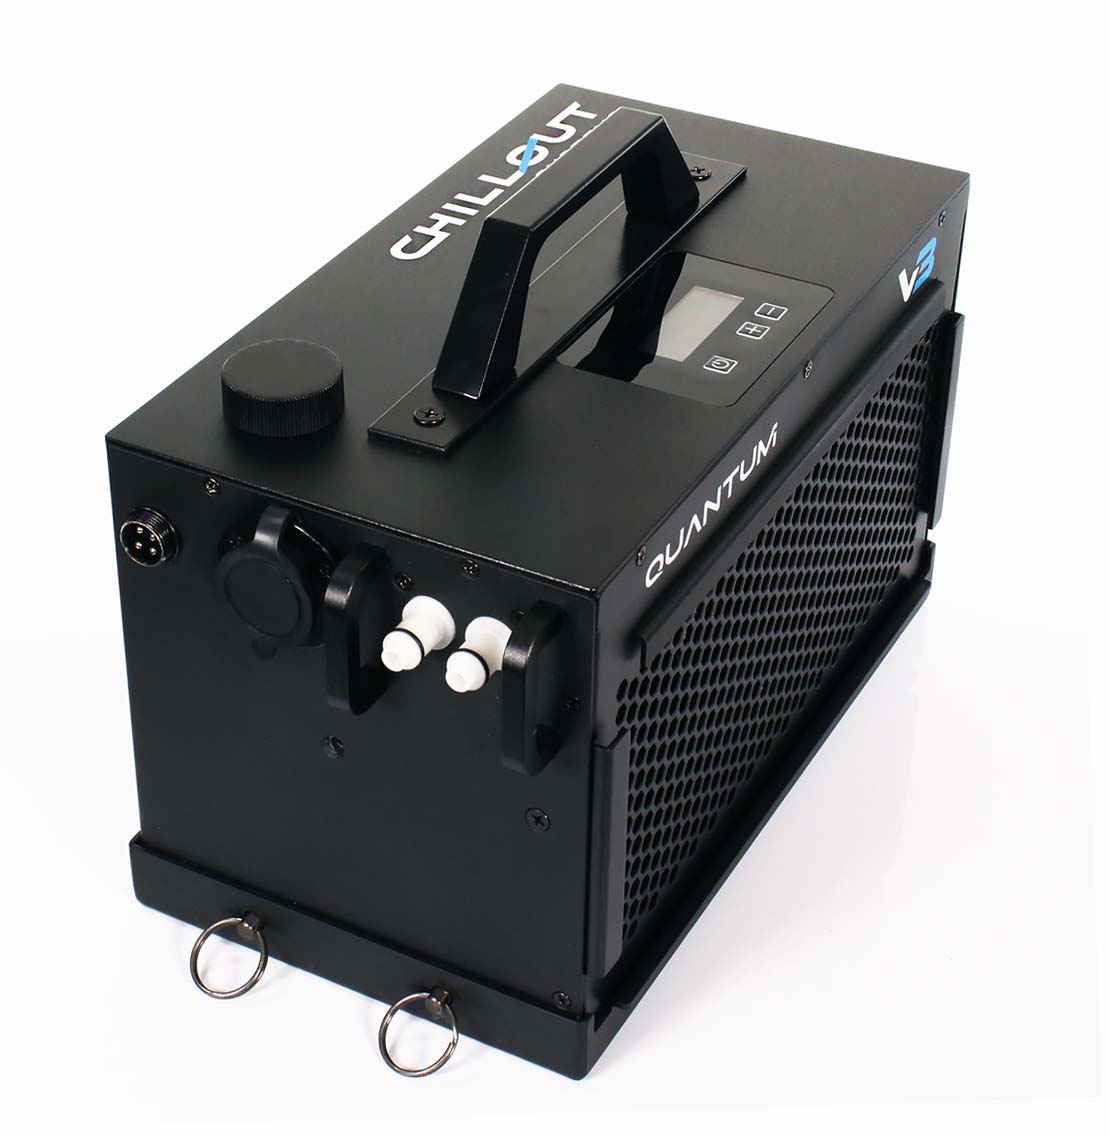 Chillout Systems Quantum v3 Cooler